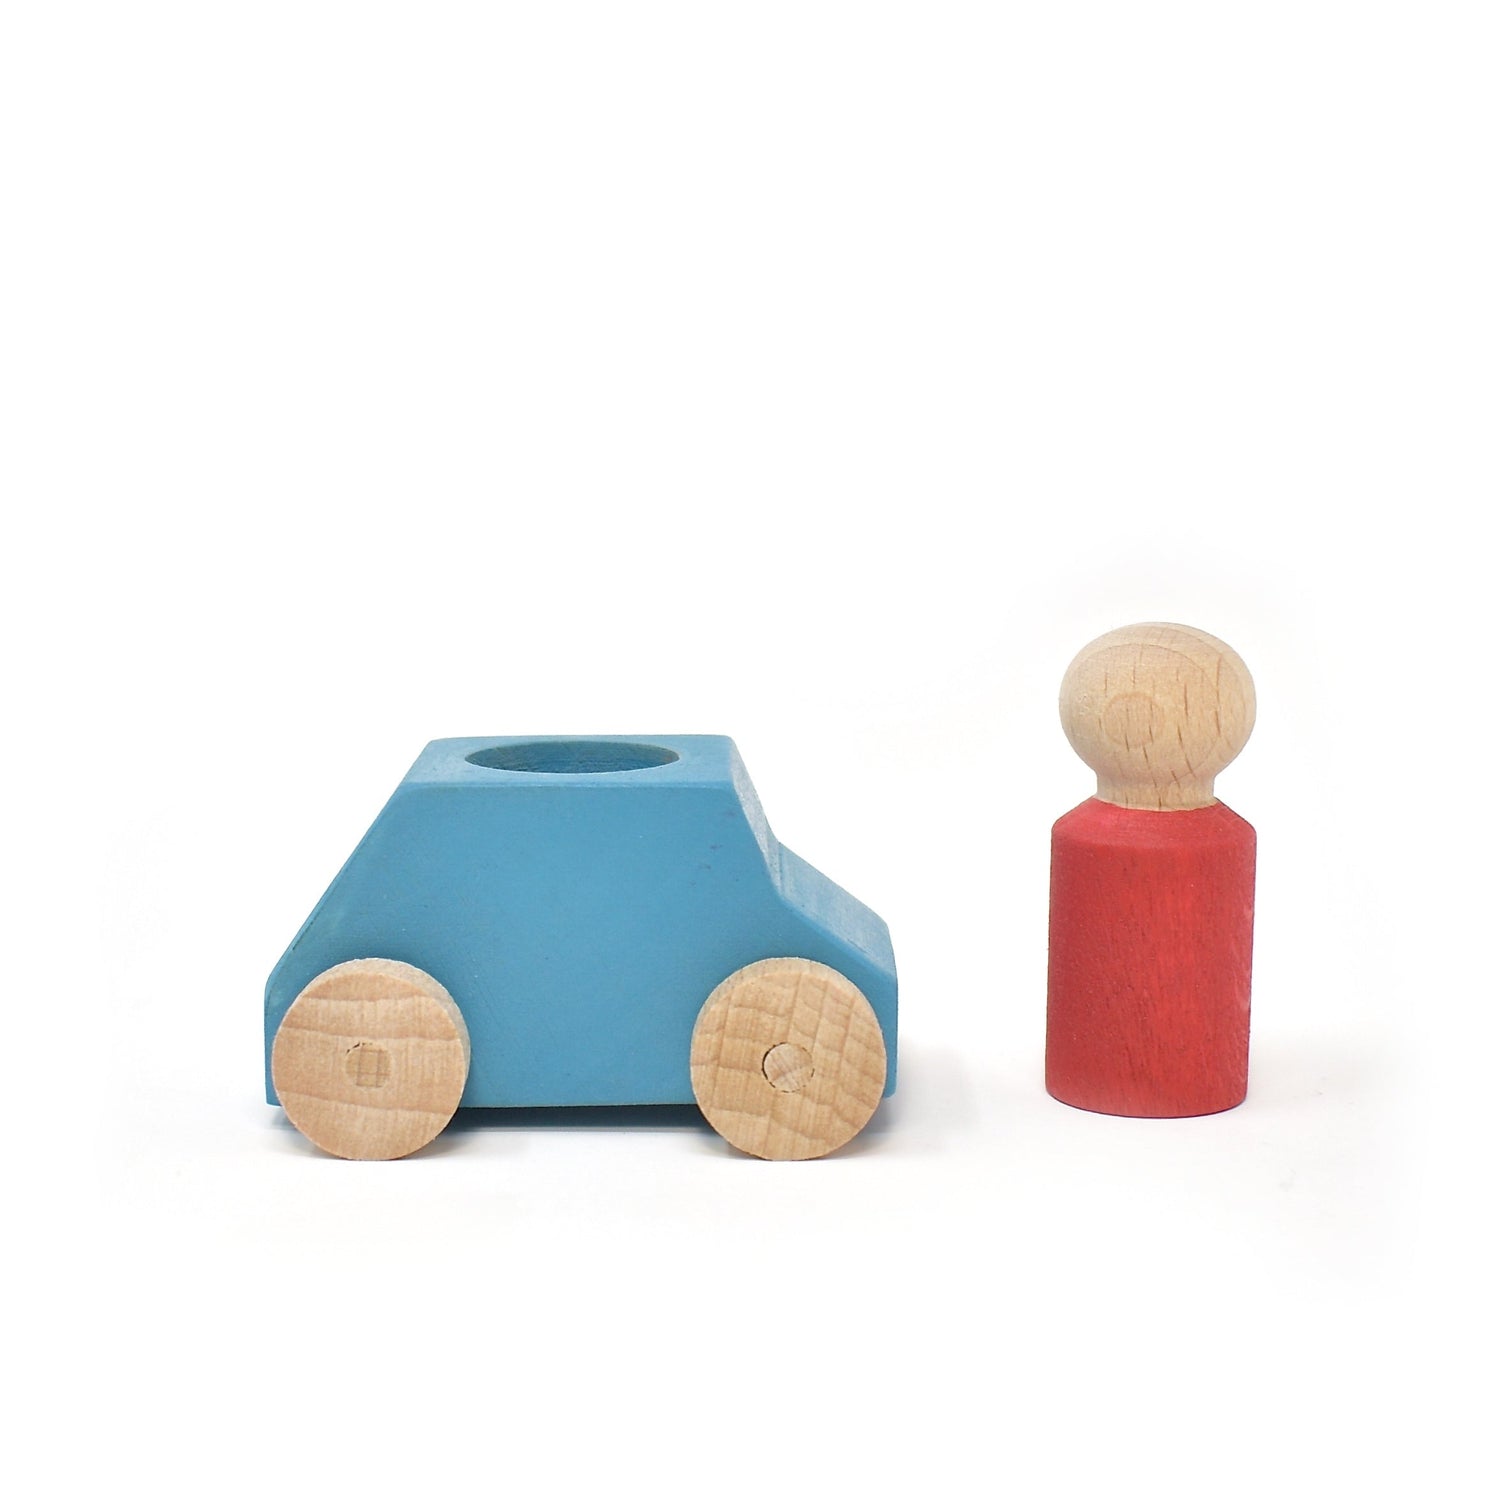 LUBULONA CAR Turquoise with Red Figure by LUBULONA - The Playful Collective